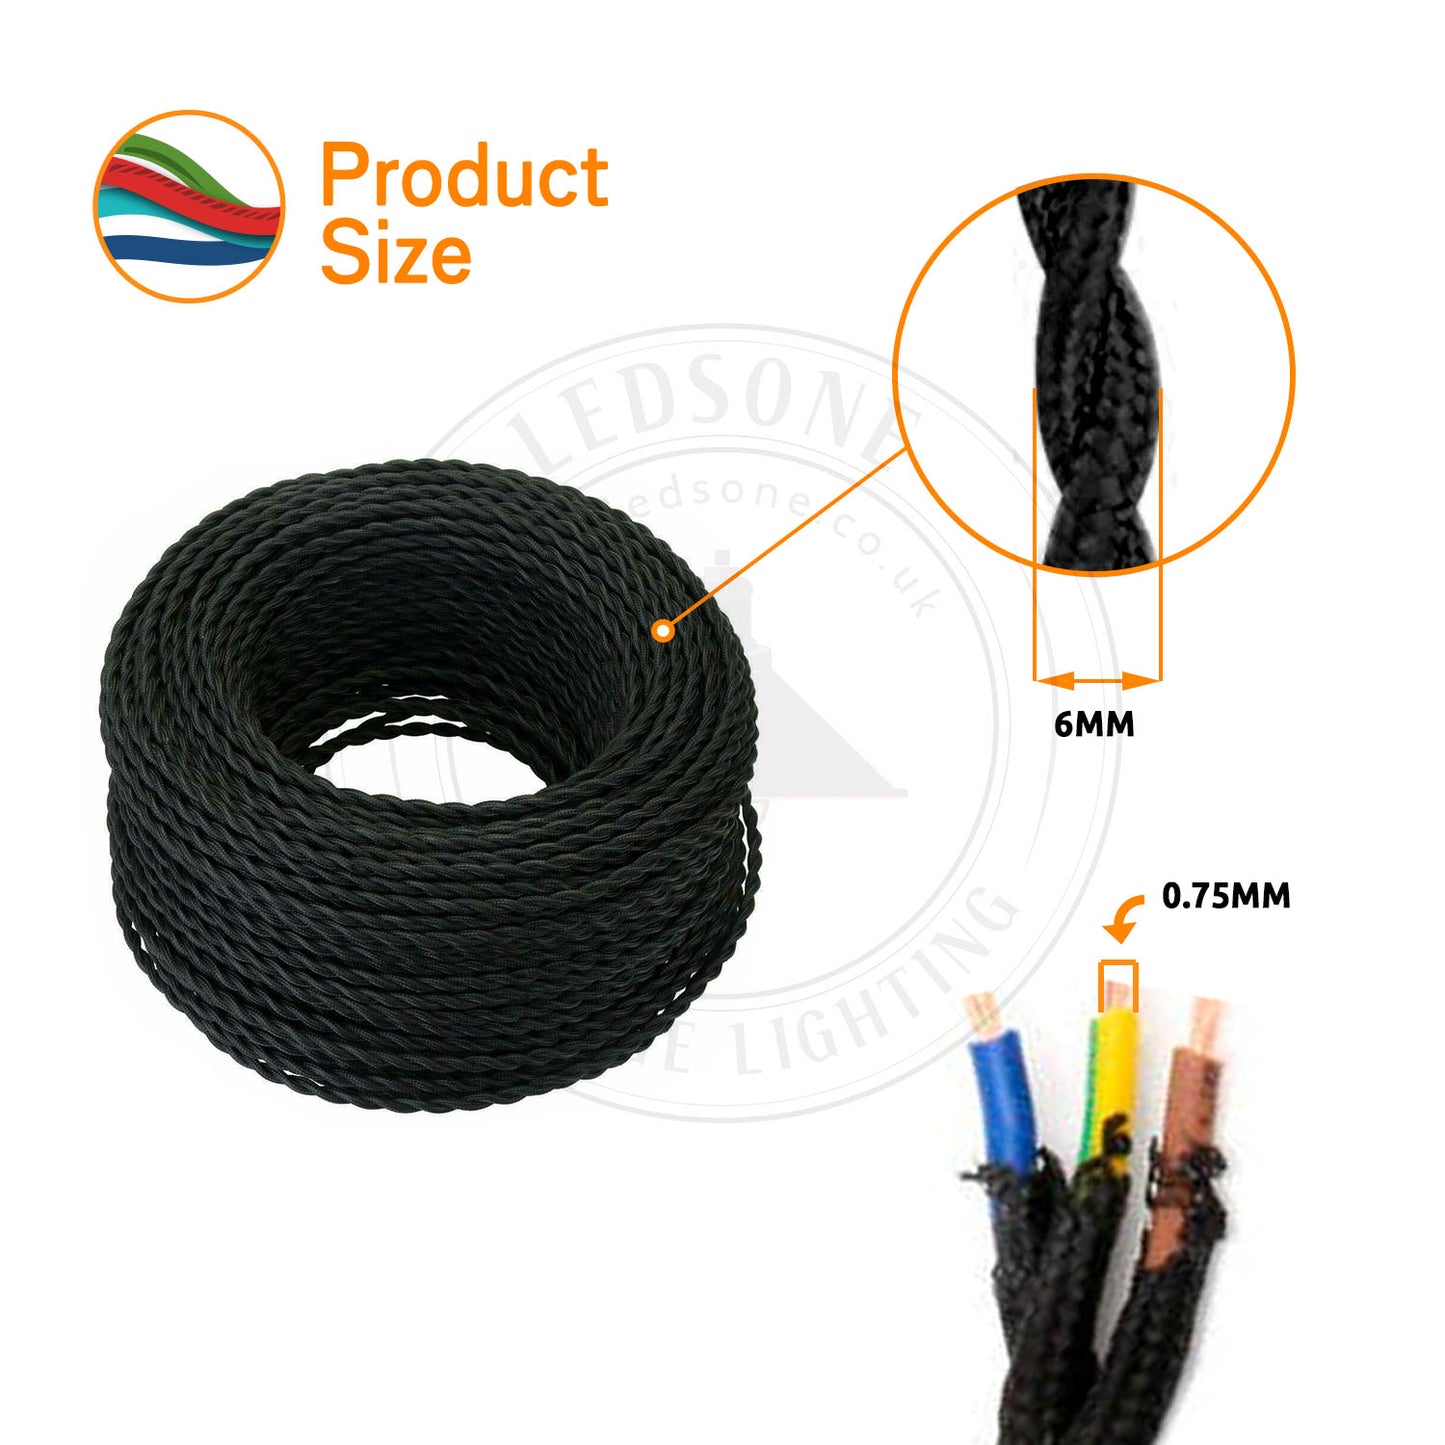 Flexible Fabric Cable